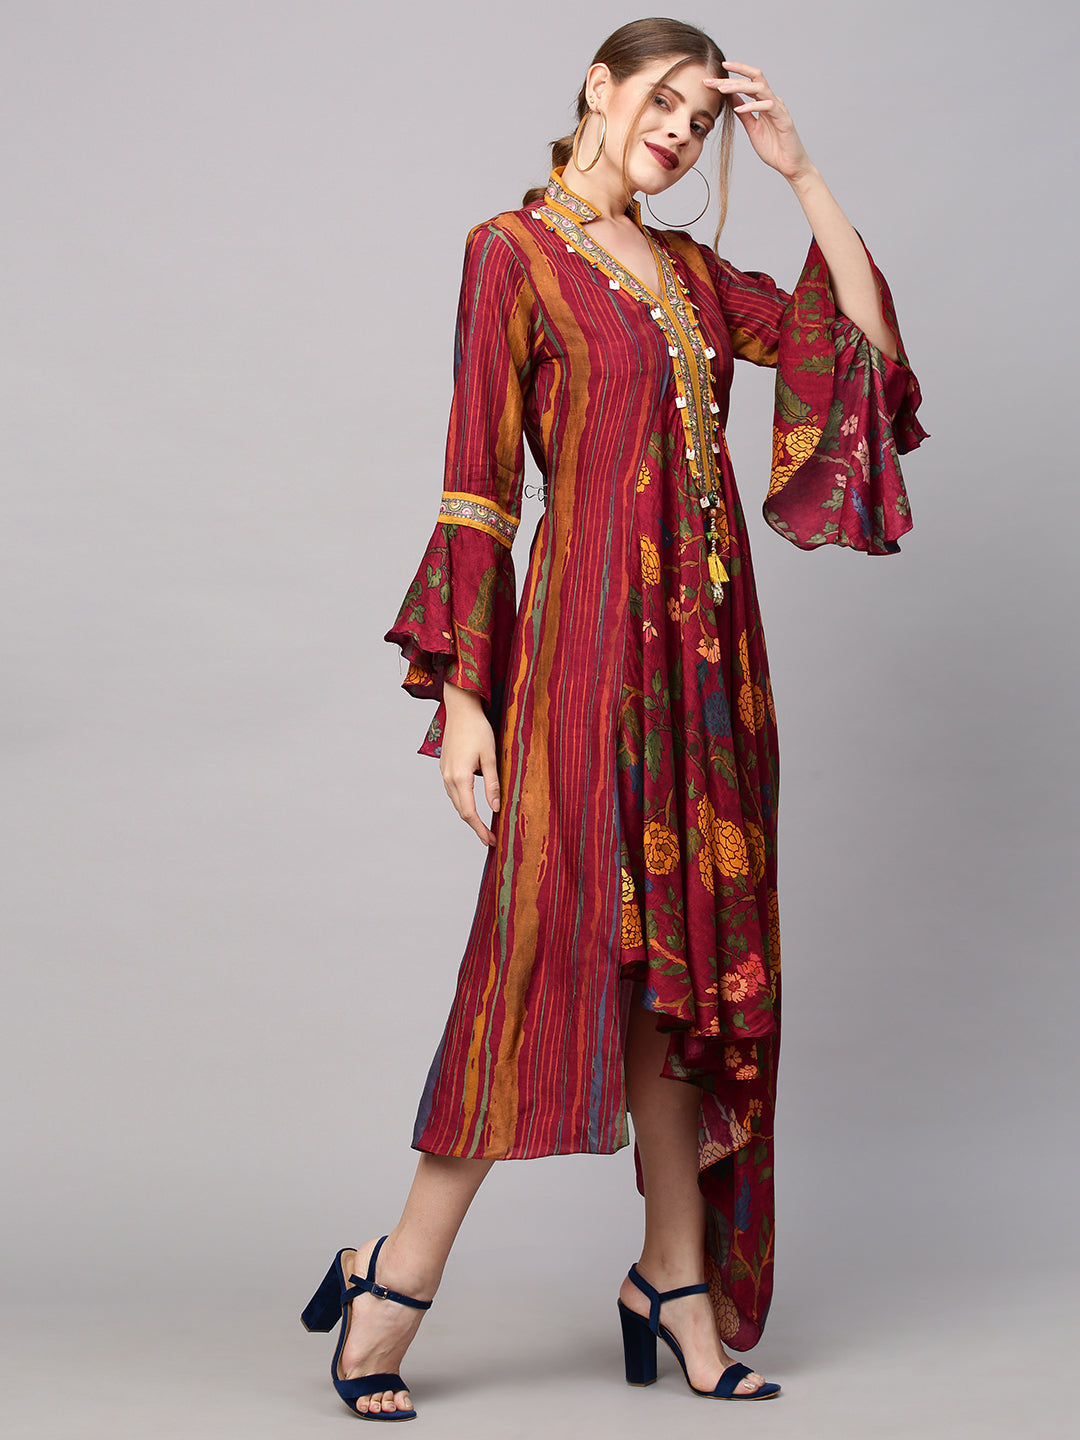 Floral & Stripes Printed Embroidered Midi Flared Cowl Dress - Dark Red